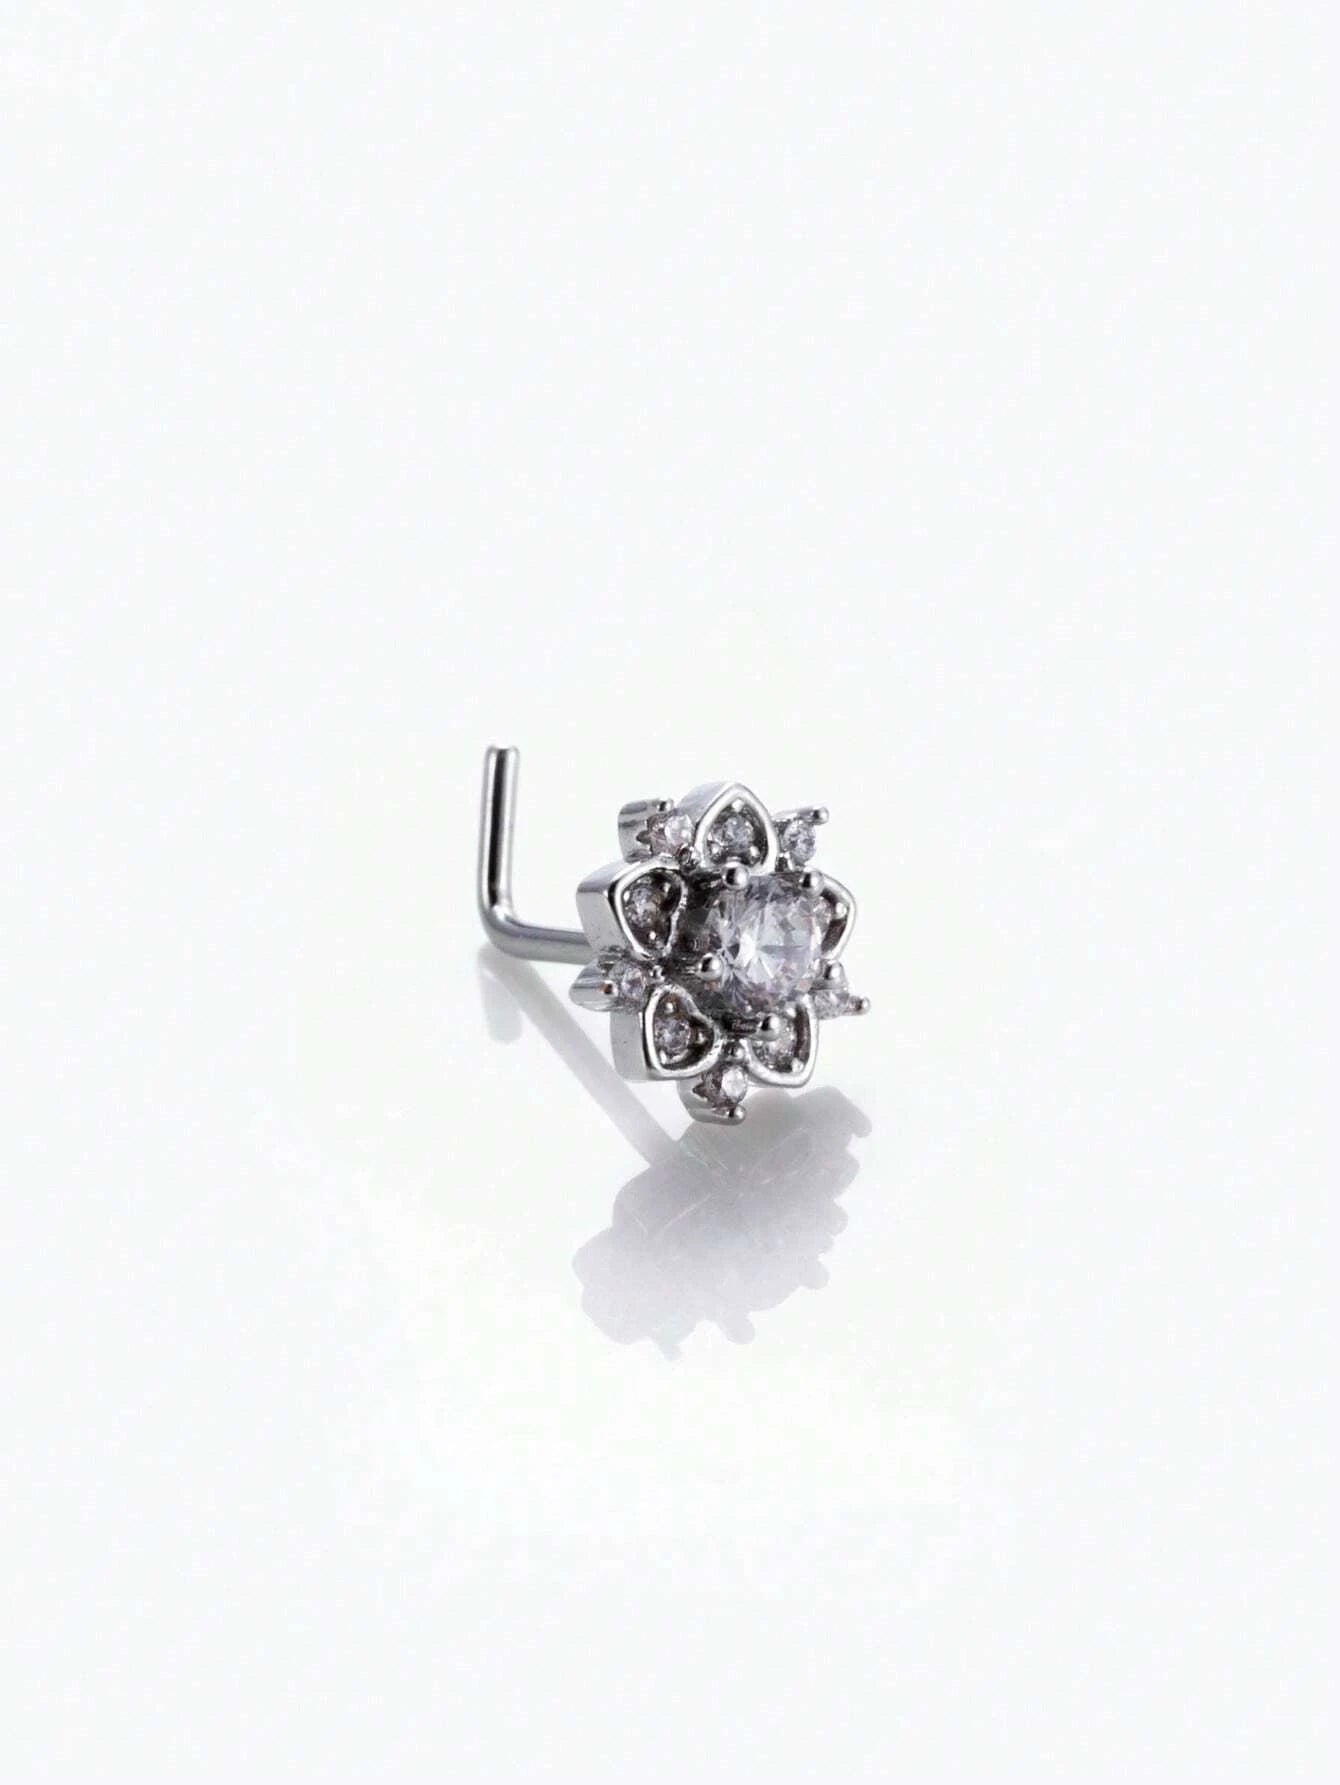 One Simple and Fashionable Nose Stud Shaped Like a Flower with Inlaid Diamond